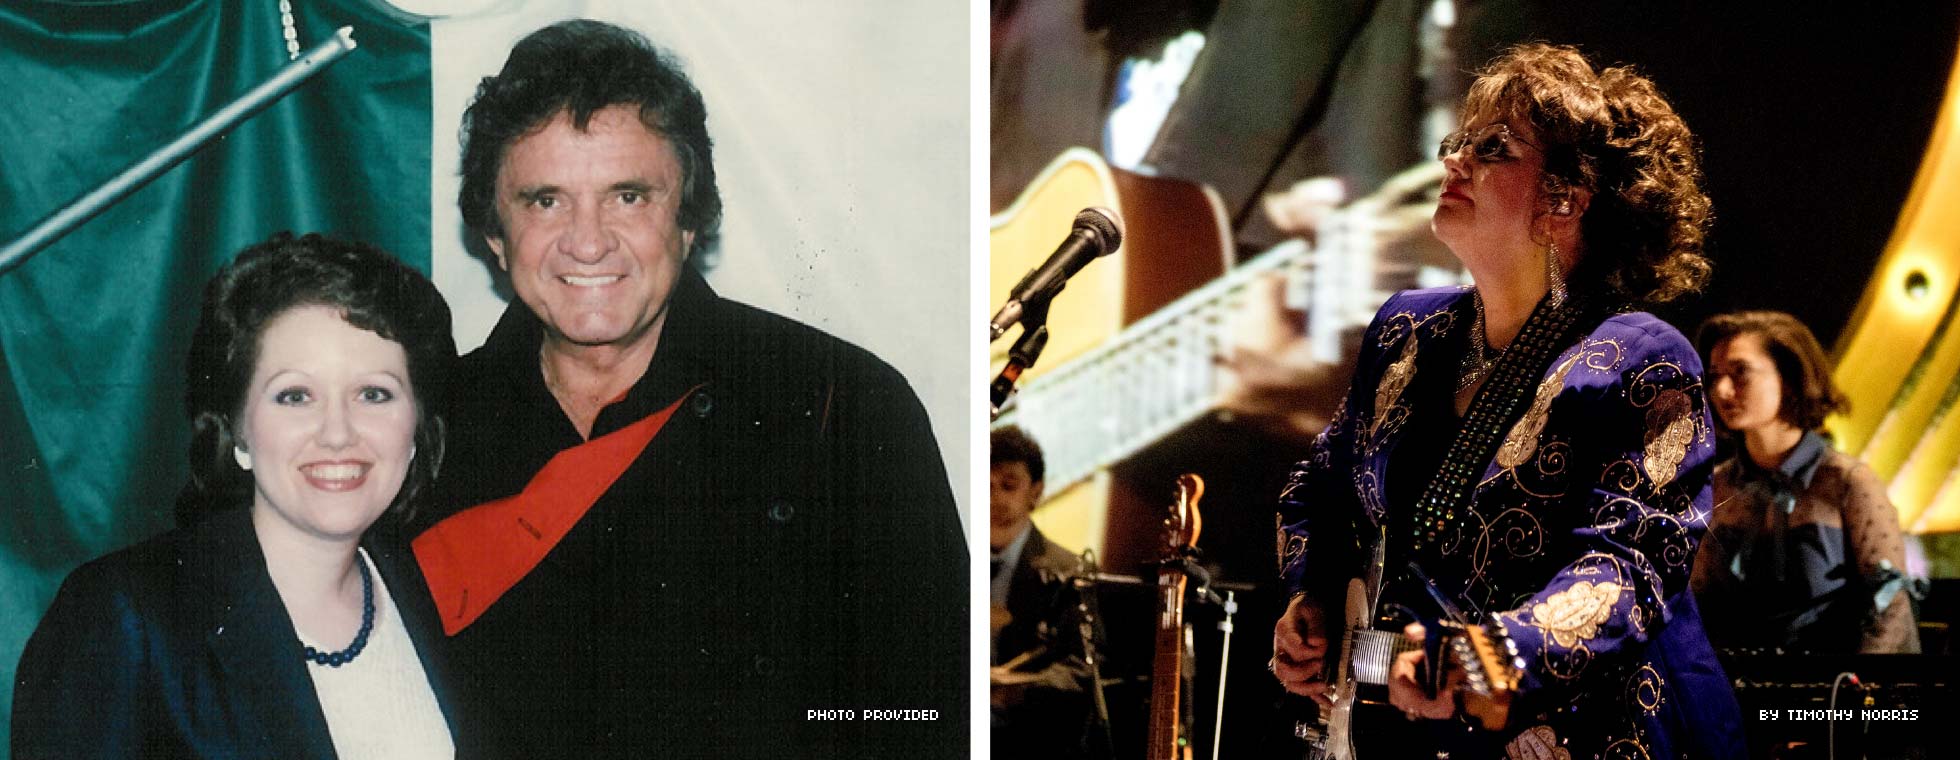 Left: Debbie Horton stands for a picture with Johnny Cash in the 80s. Right: Debbie Horton plays the guitar on stage.